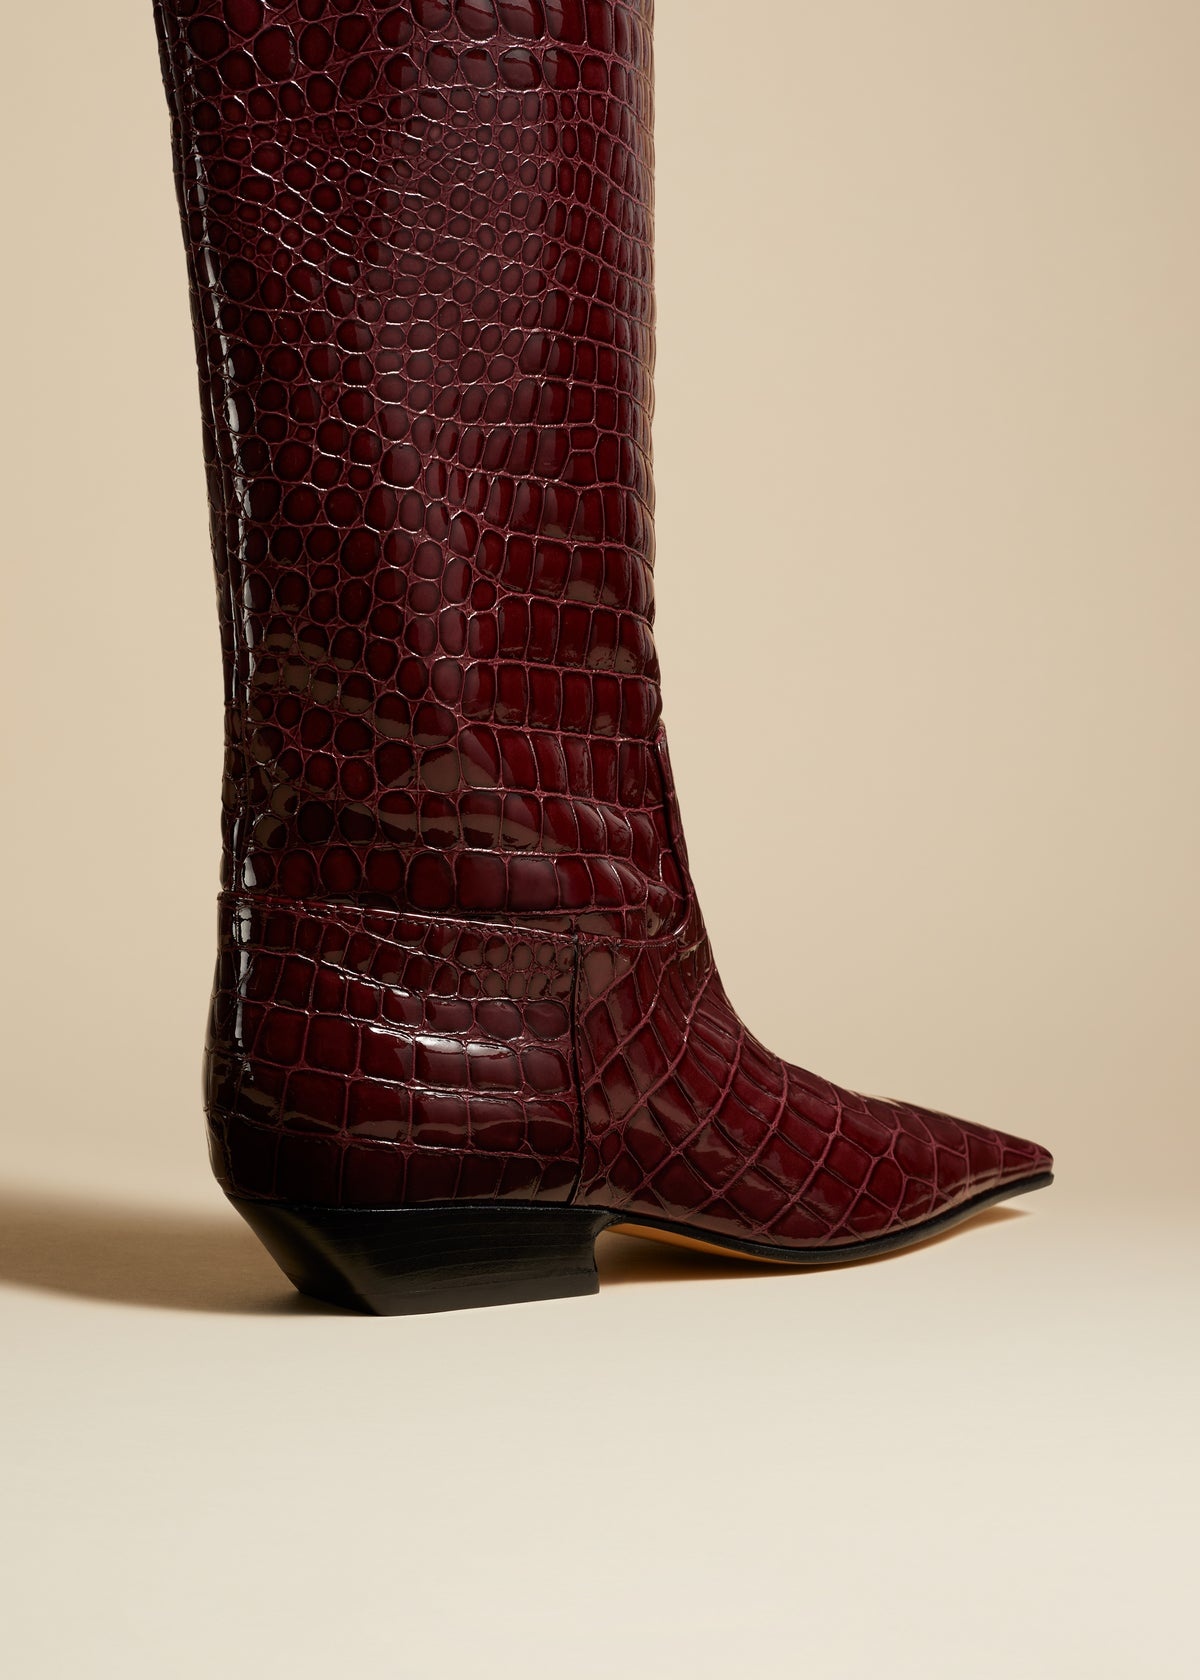 The Marfa Knee-High Boot in Bordeaux Croc-Embossed Leather - 3